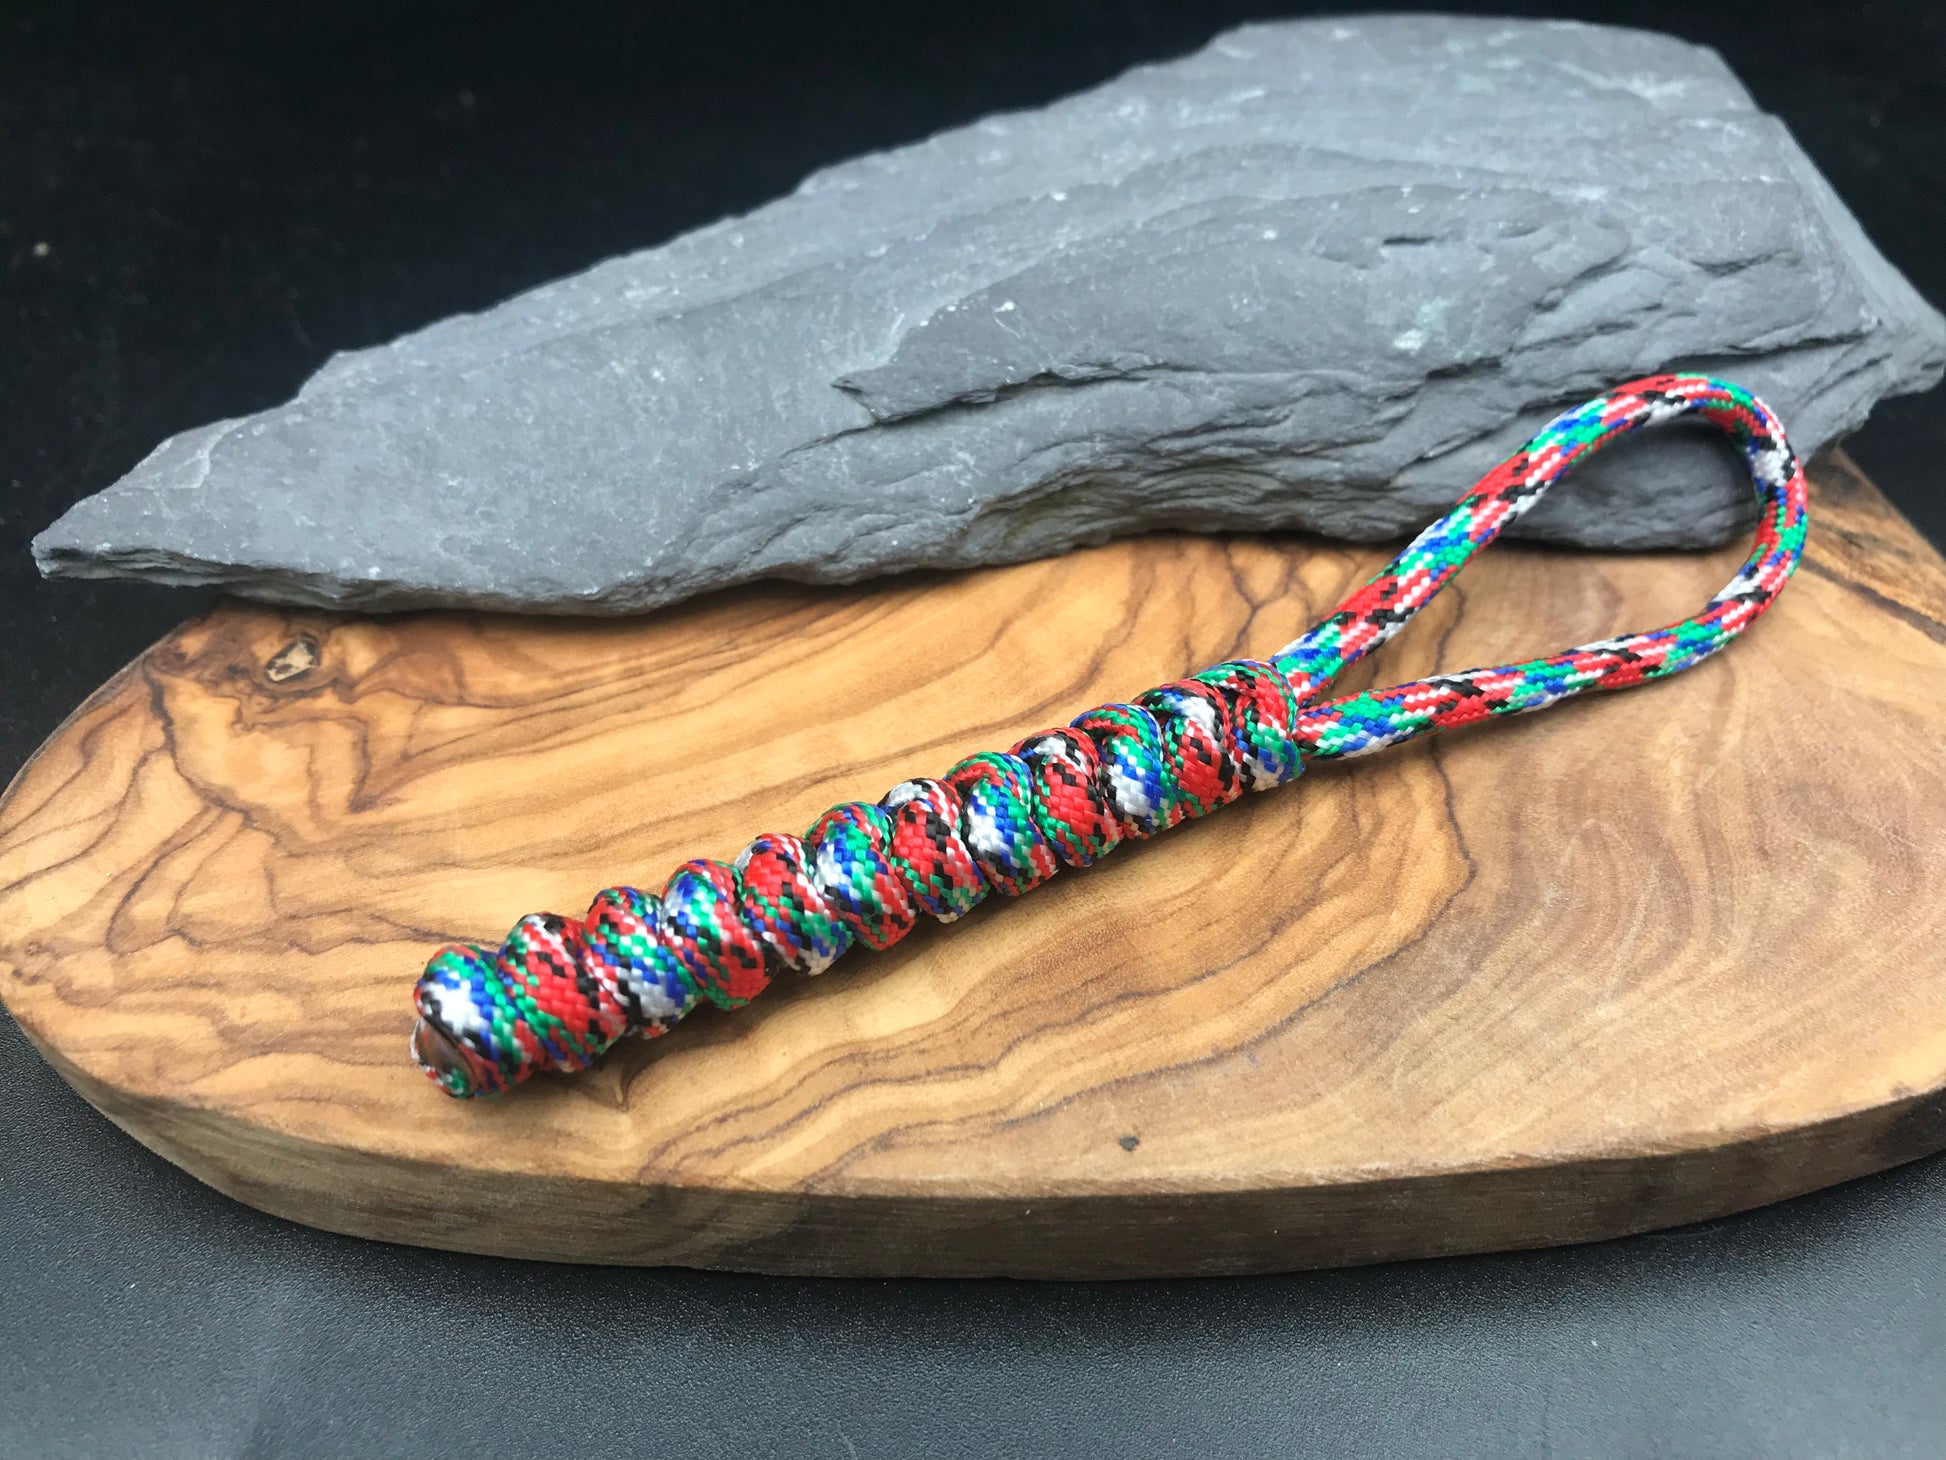 Hand made Paracord lanyard in Urban graffiti blue red green coloured snake knot design